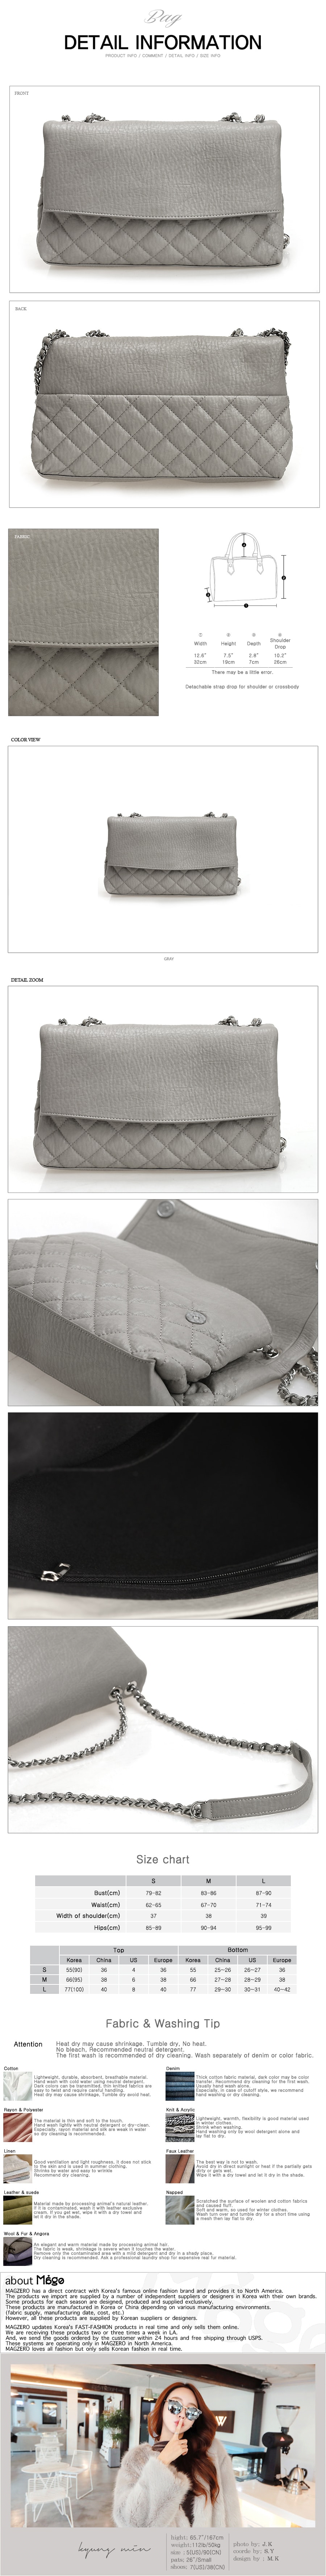 KOREA Quilted Chain Shoulder Bag #Grey Faux Leather [Free Shipping]